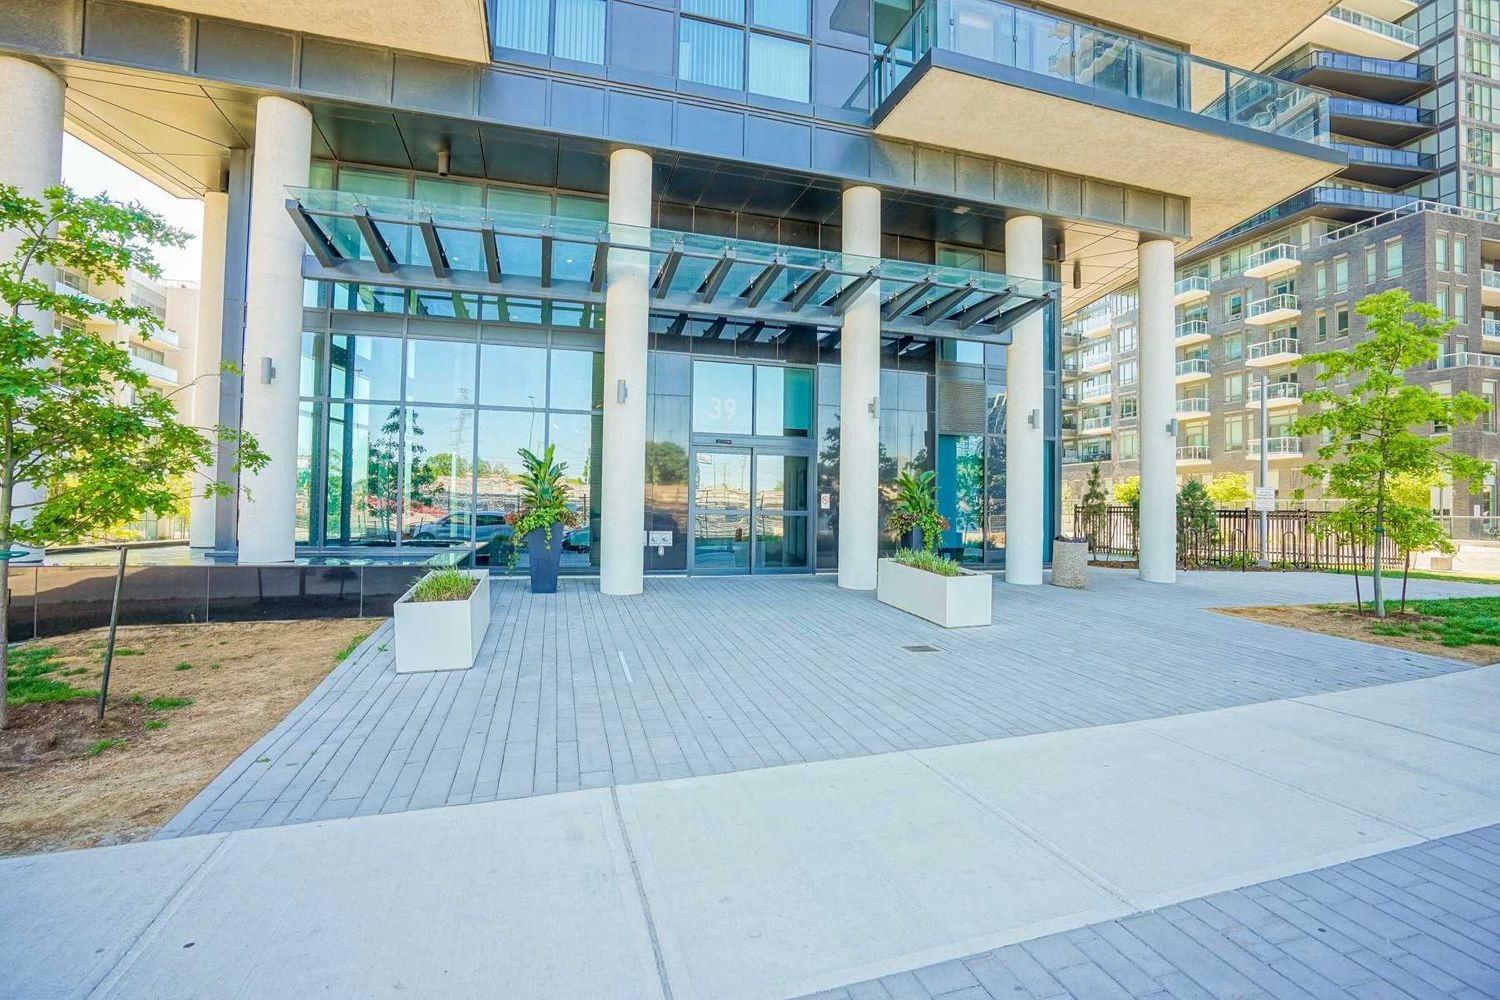 39 Annie Craig Drive. Cove at Waterways Condos  is located in  Etobicoke, Toronto - image #3 of 3